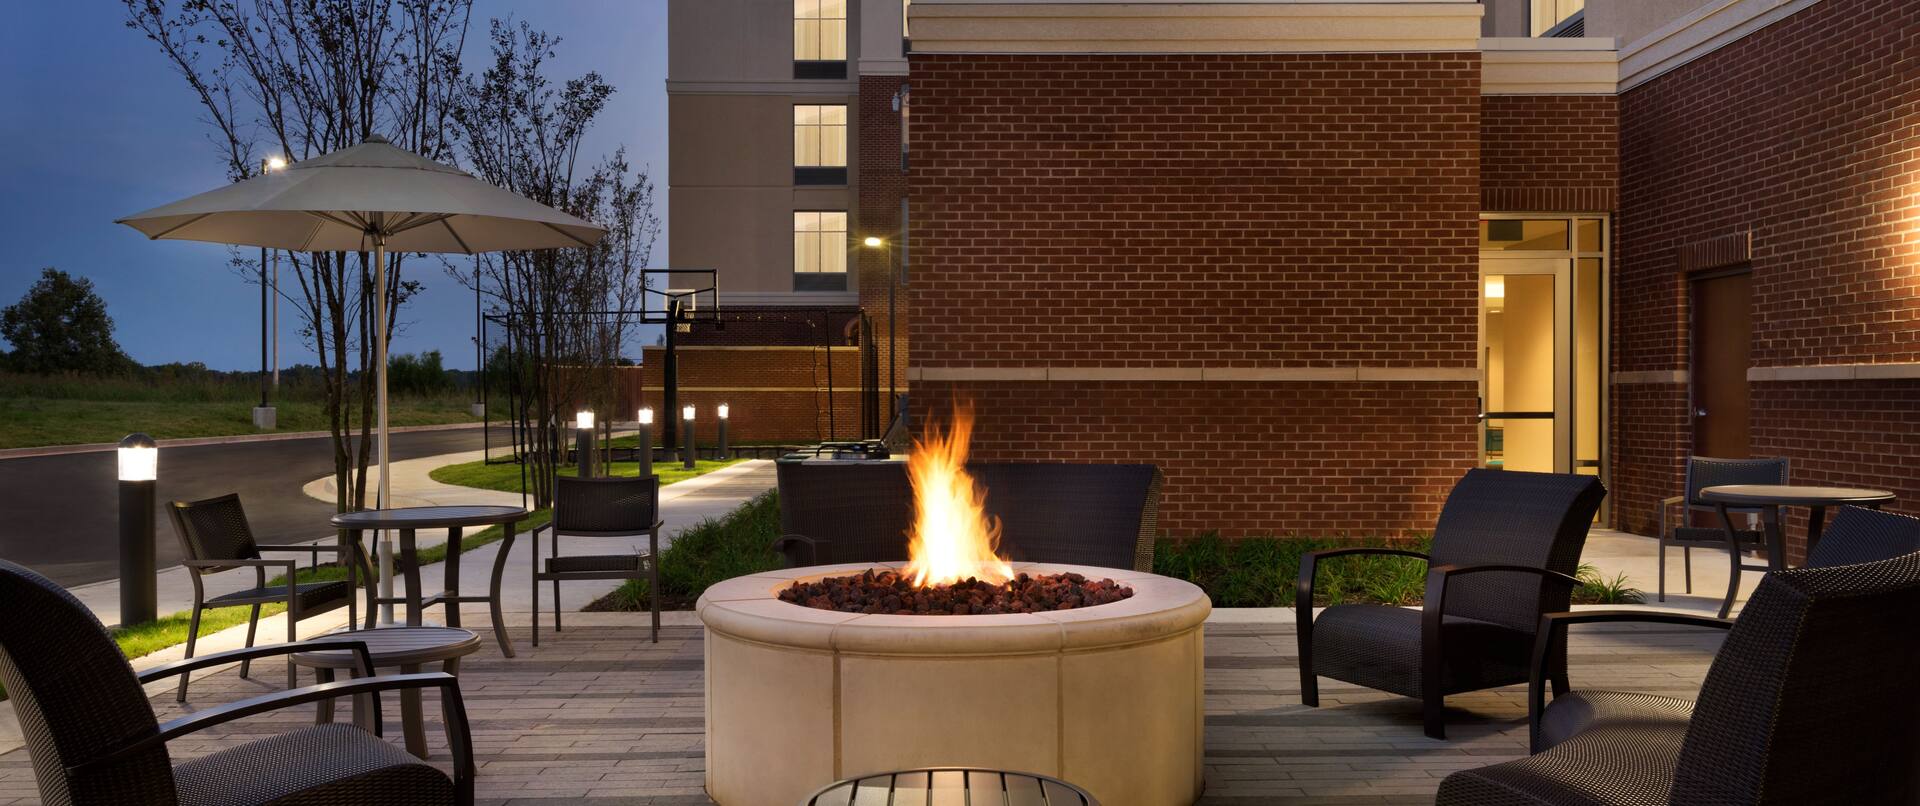 Outdoor Courtyard Firepit at Night